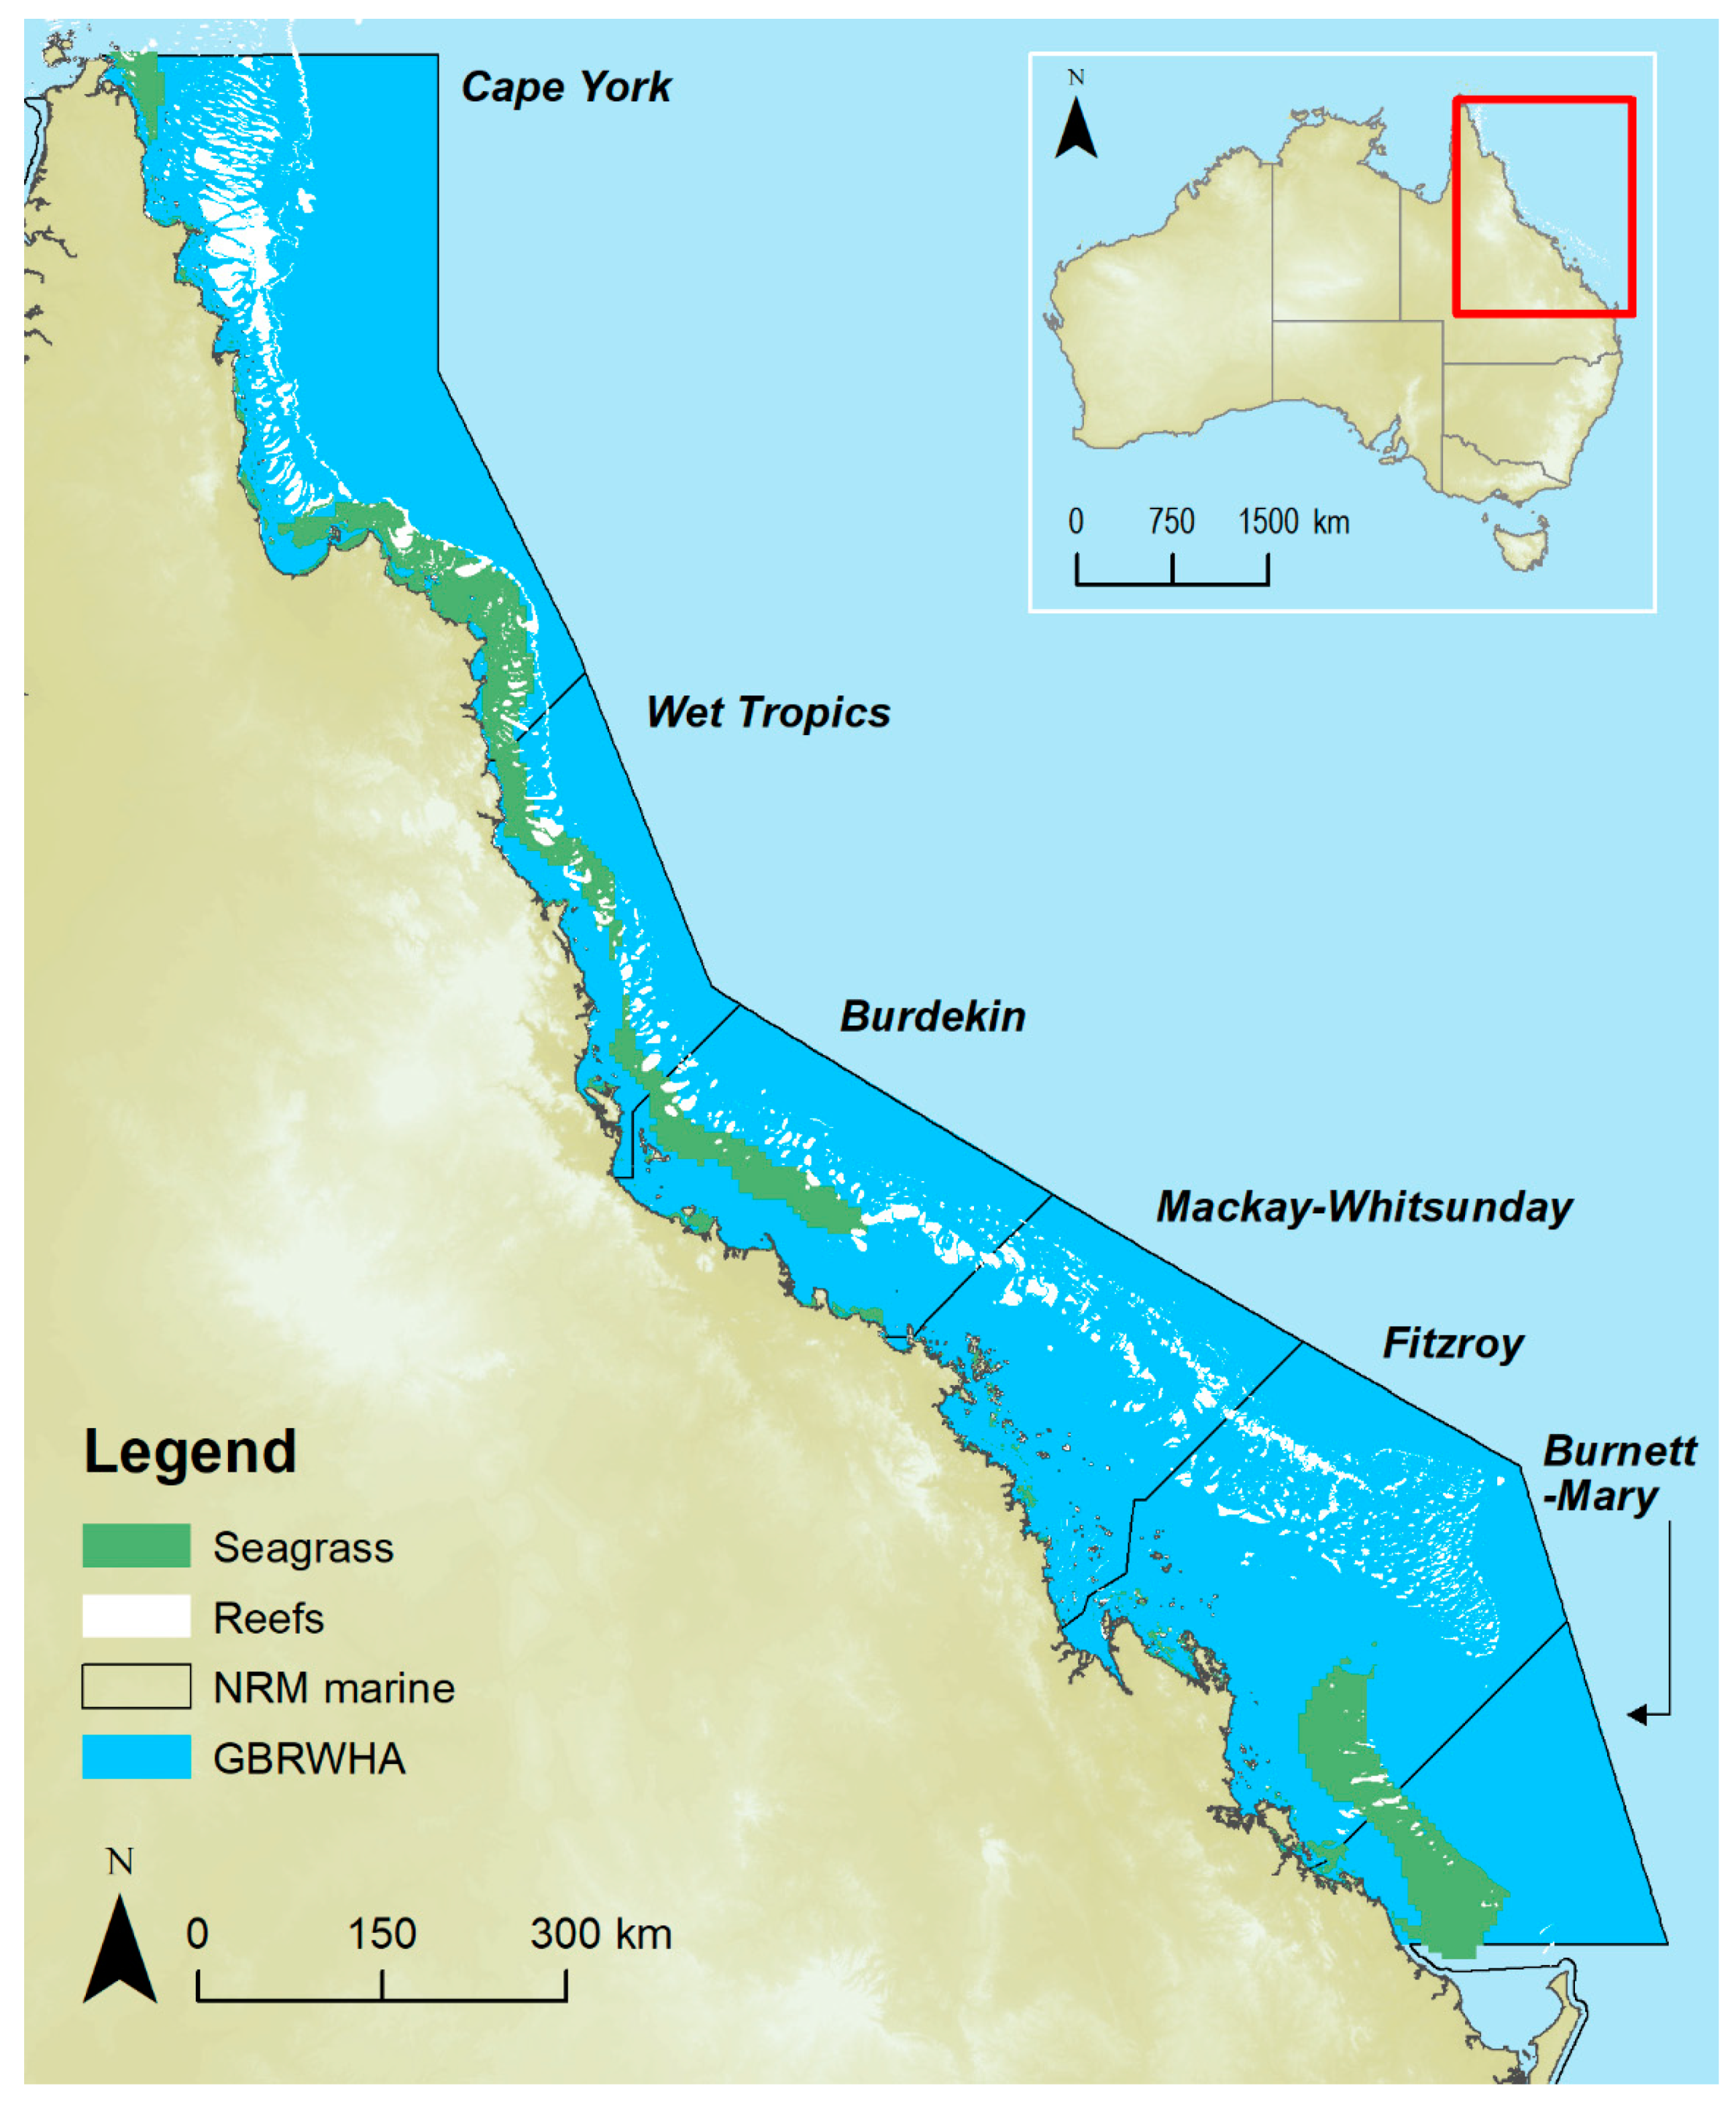 Remote Sensing | Free Full-Text | Improving Approaches to Mapping Seagrass  within the Great Barrier Reef: From Field to Spaceborne Earth Observation